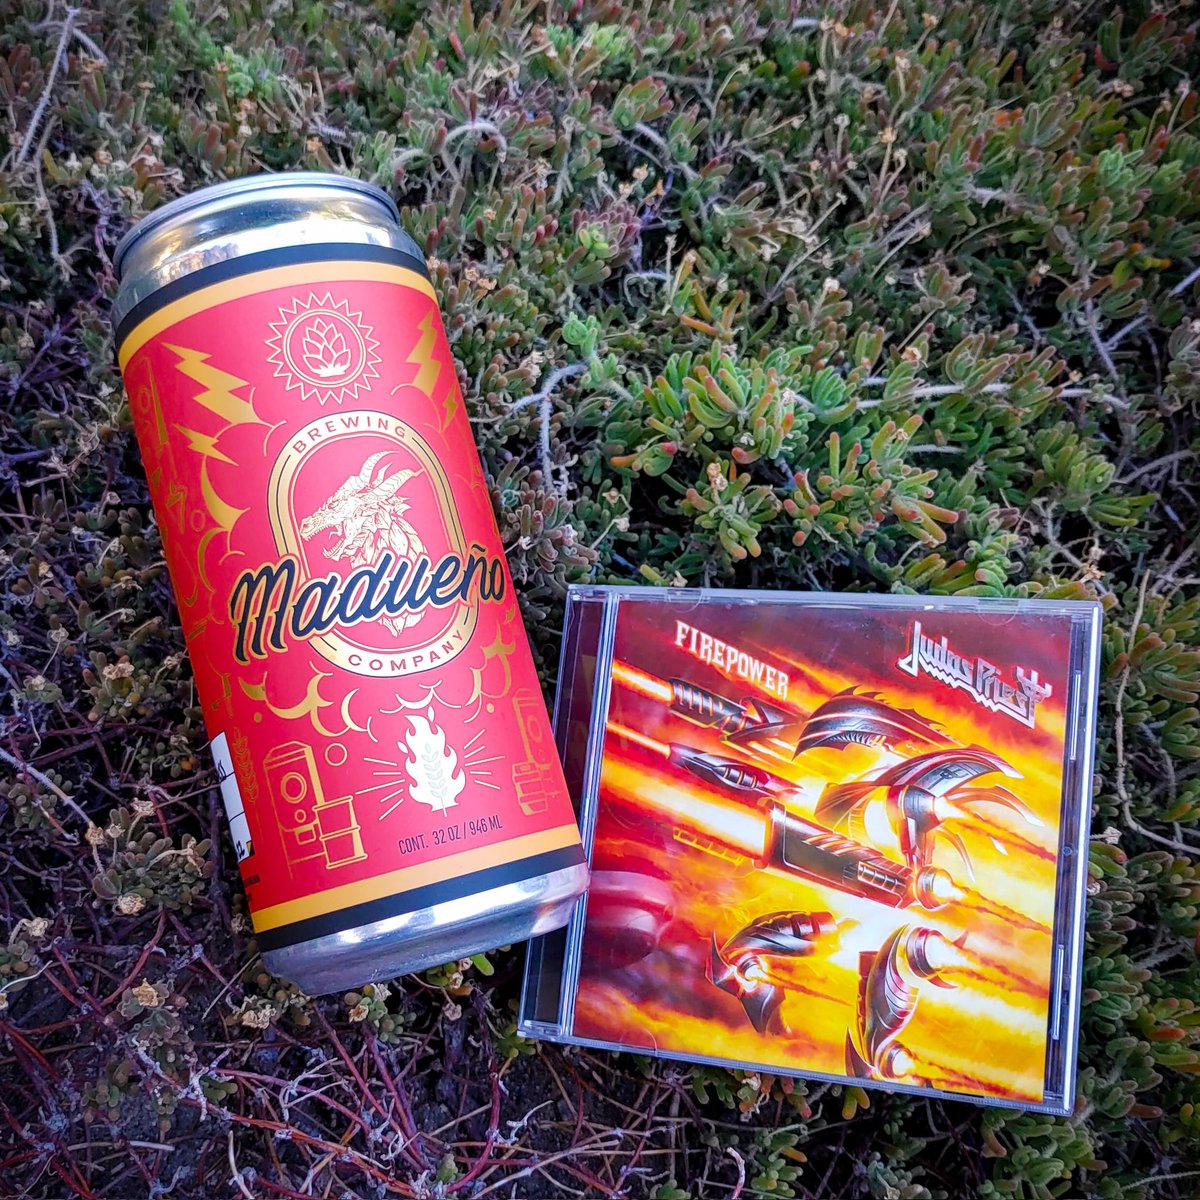 Madueño Brewing Co.   🇲🇽
Pineapple Express New England IPA,
6.5 % with Simcoe and Yellow and Centenial hops, tremendous combination for tremendous álbum.
@judaspriest 🇬🇧 - Firepower 🤘 time to headbang
#hazybeer #neipa #metalcollector #metalforever🎸🎸🎸⚡️ #metalismylife #BEER